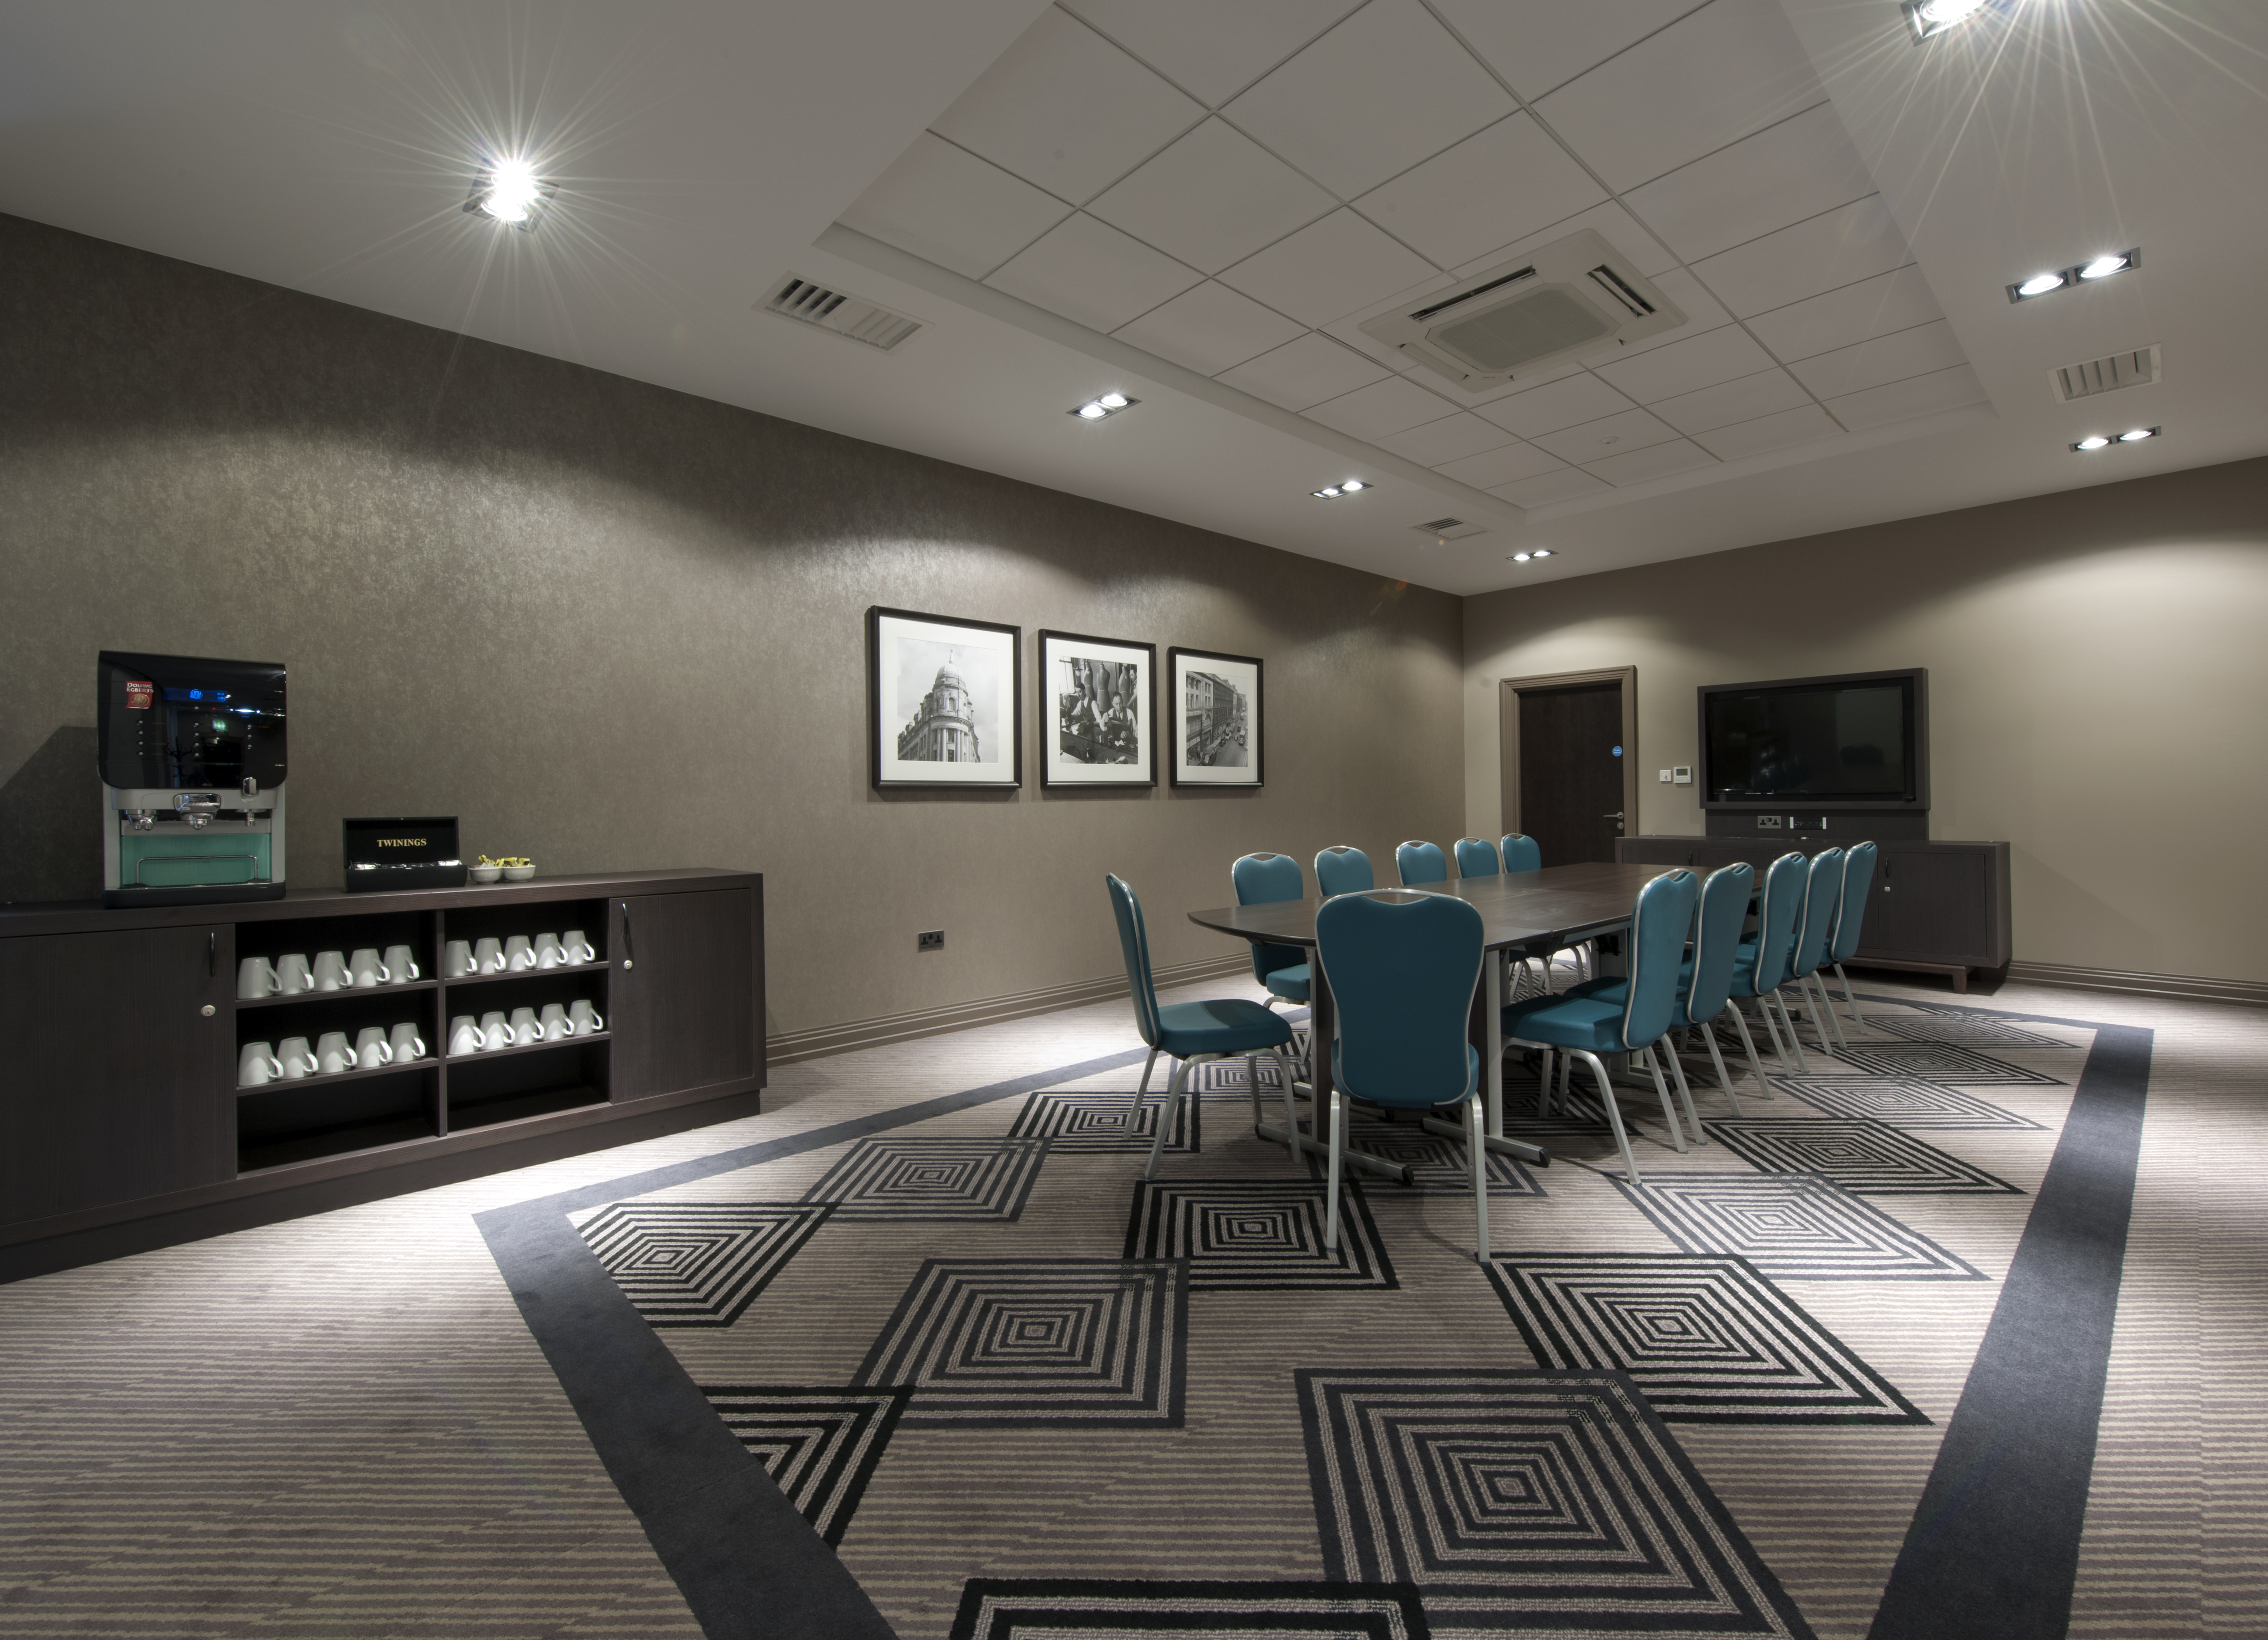 Beverage Station, Wall Art, TV, and Seating For 12 Around Boardroom Table